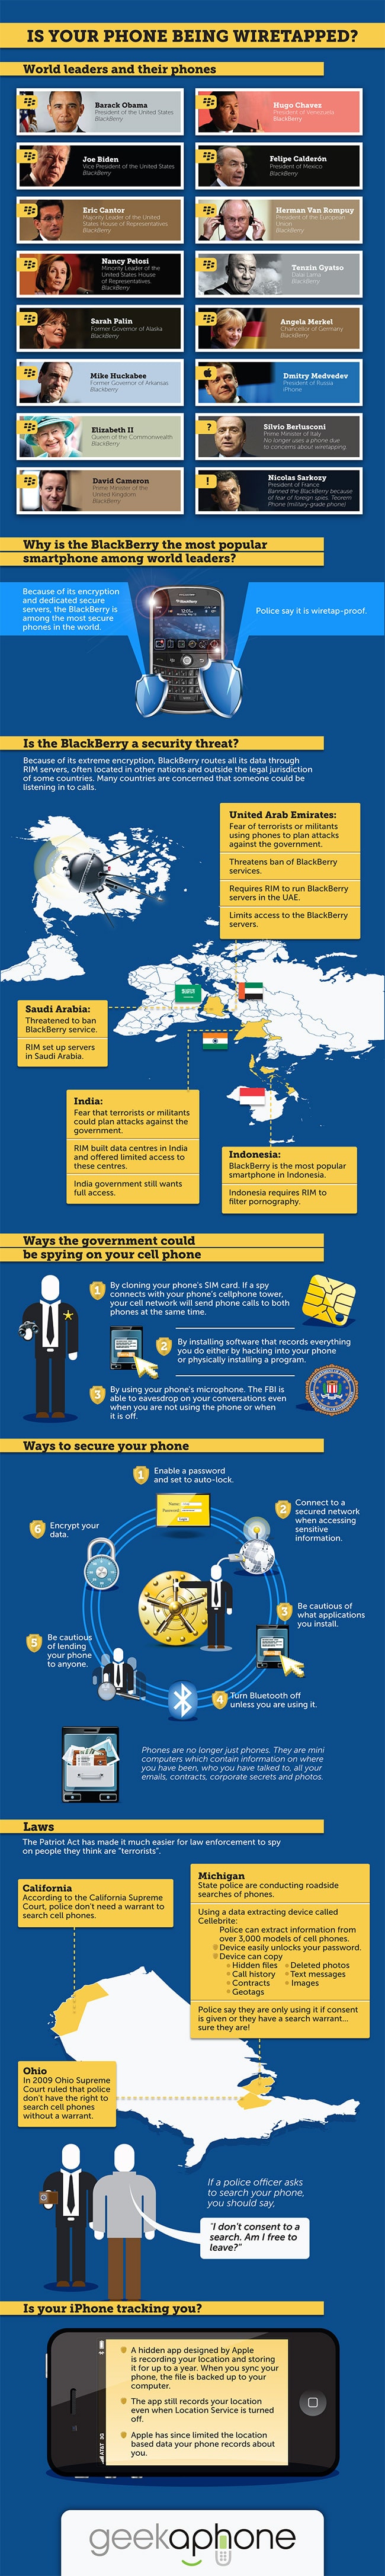 Cell Phone Wiretapping: Mobile Security Explained [Infographic]